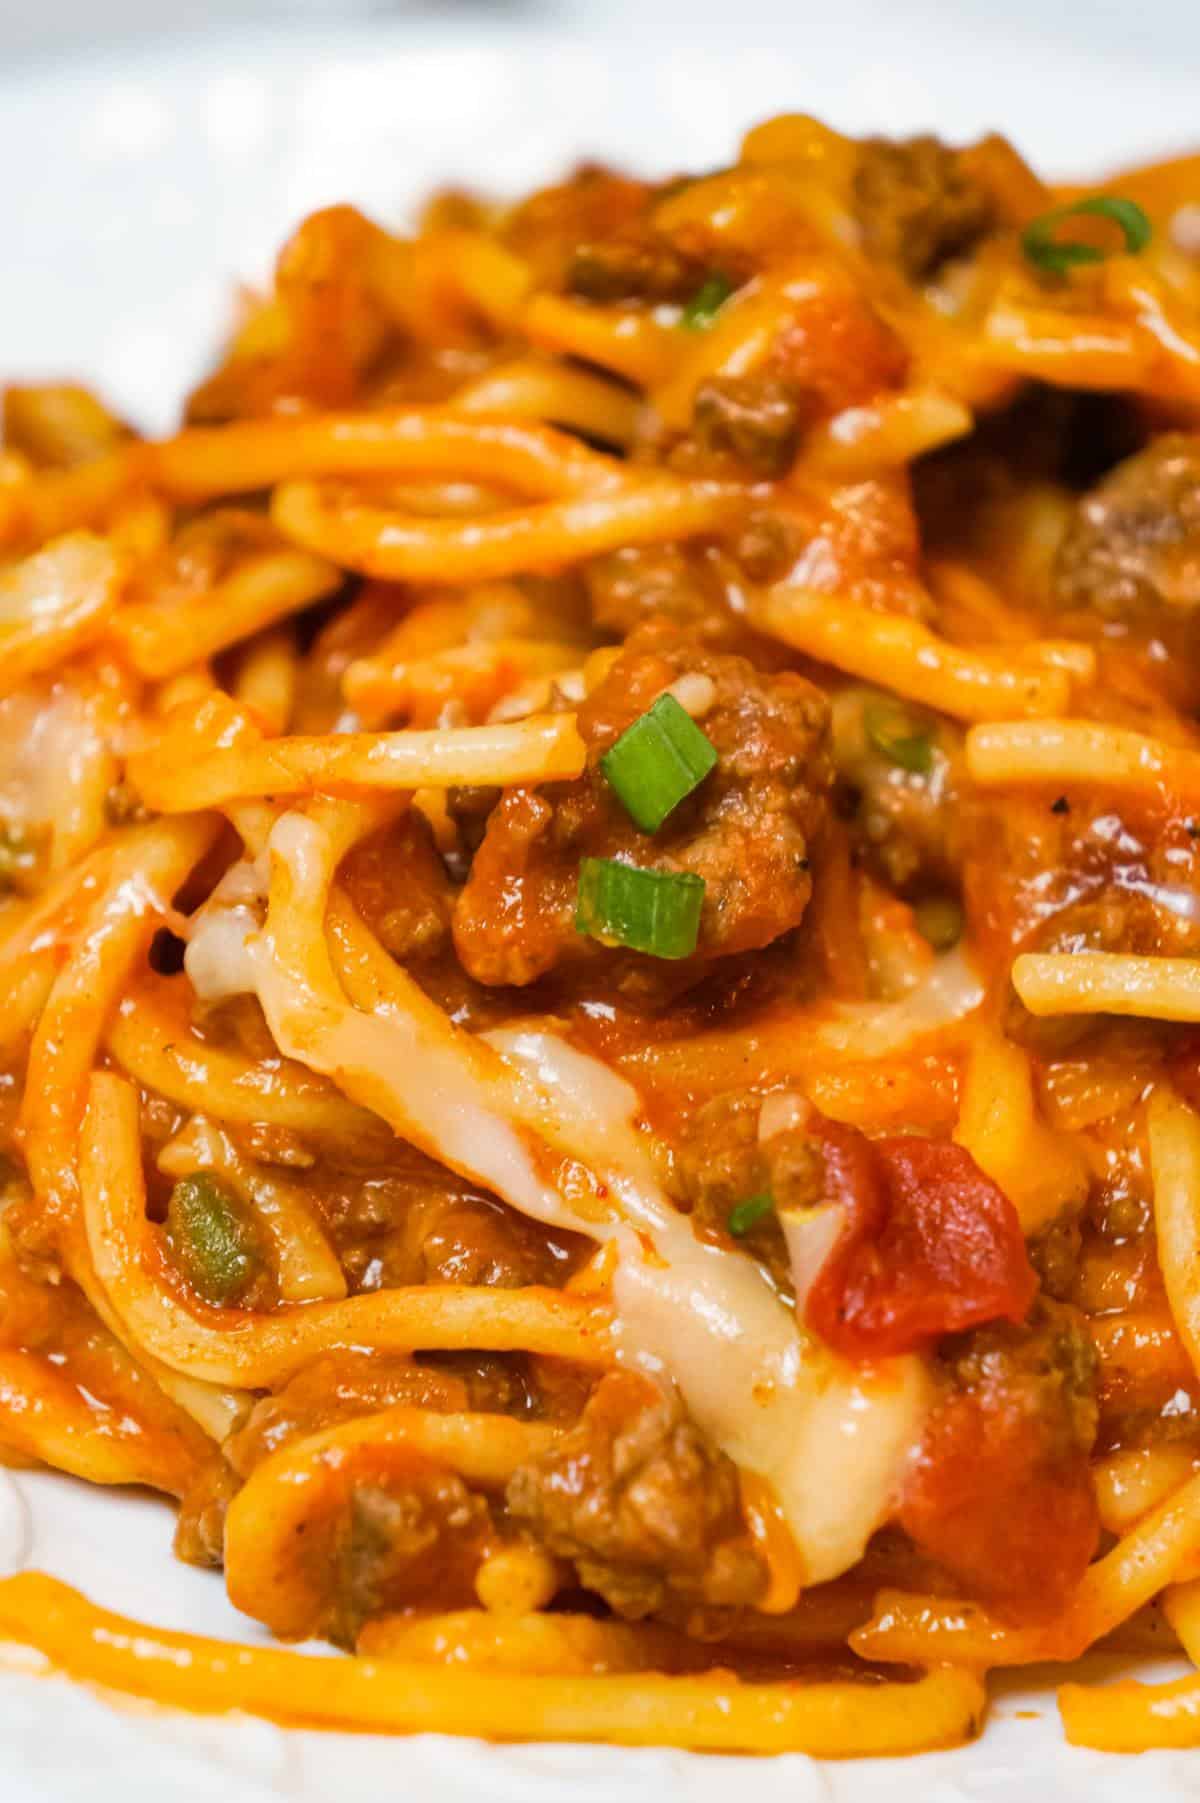 Cheesy Taco Spaghetti is an easy weeknight dinner recipe loaded with ground beef, Rotel diced tomatoes and chilies, green onions and shredded cheese all tossed in taco seasoning and tomato sauce.